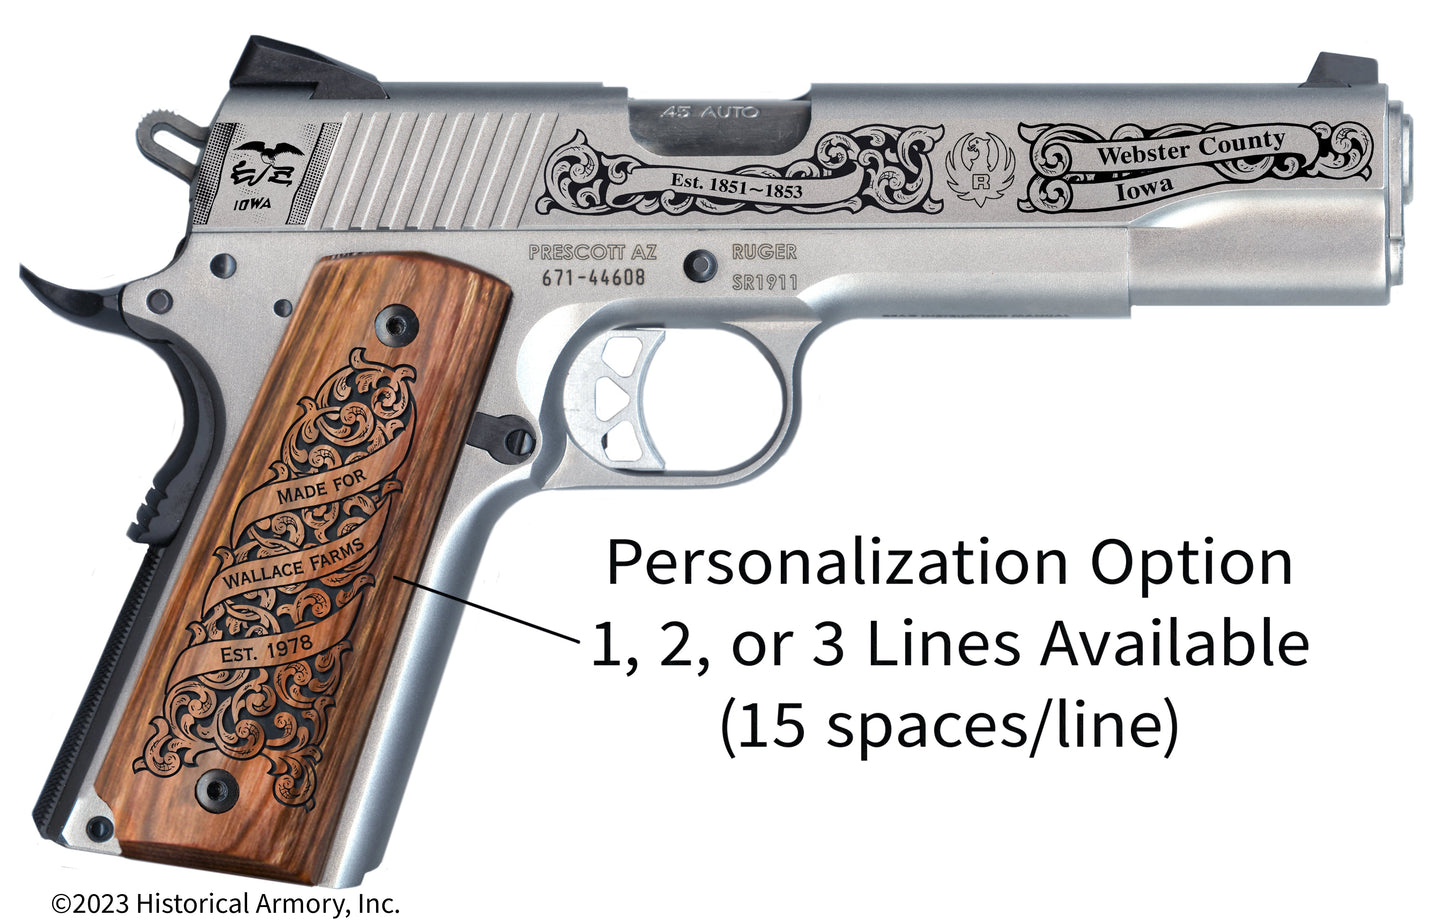 Webster County Iowa Personalized Engraved .45 Auto Ruger 1911